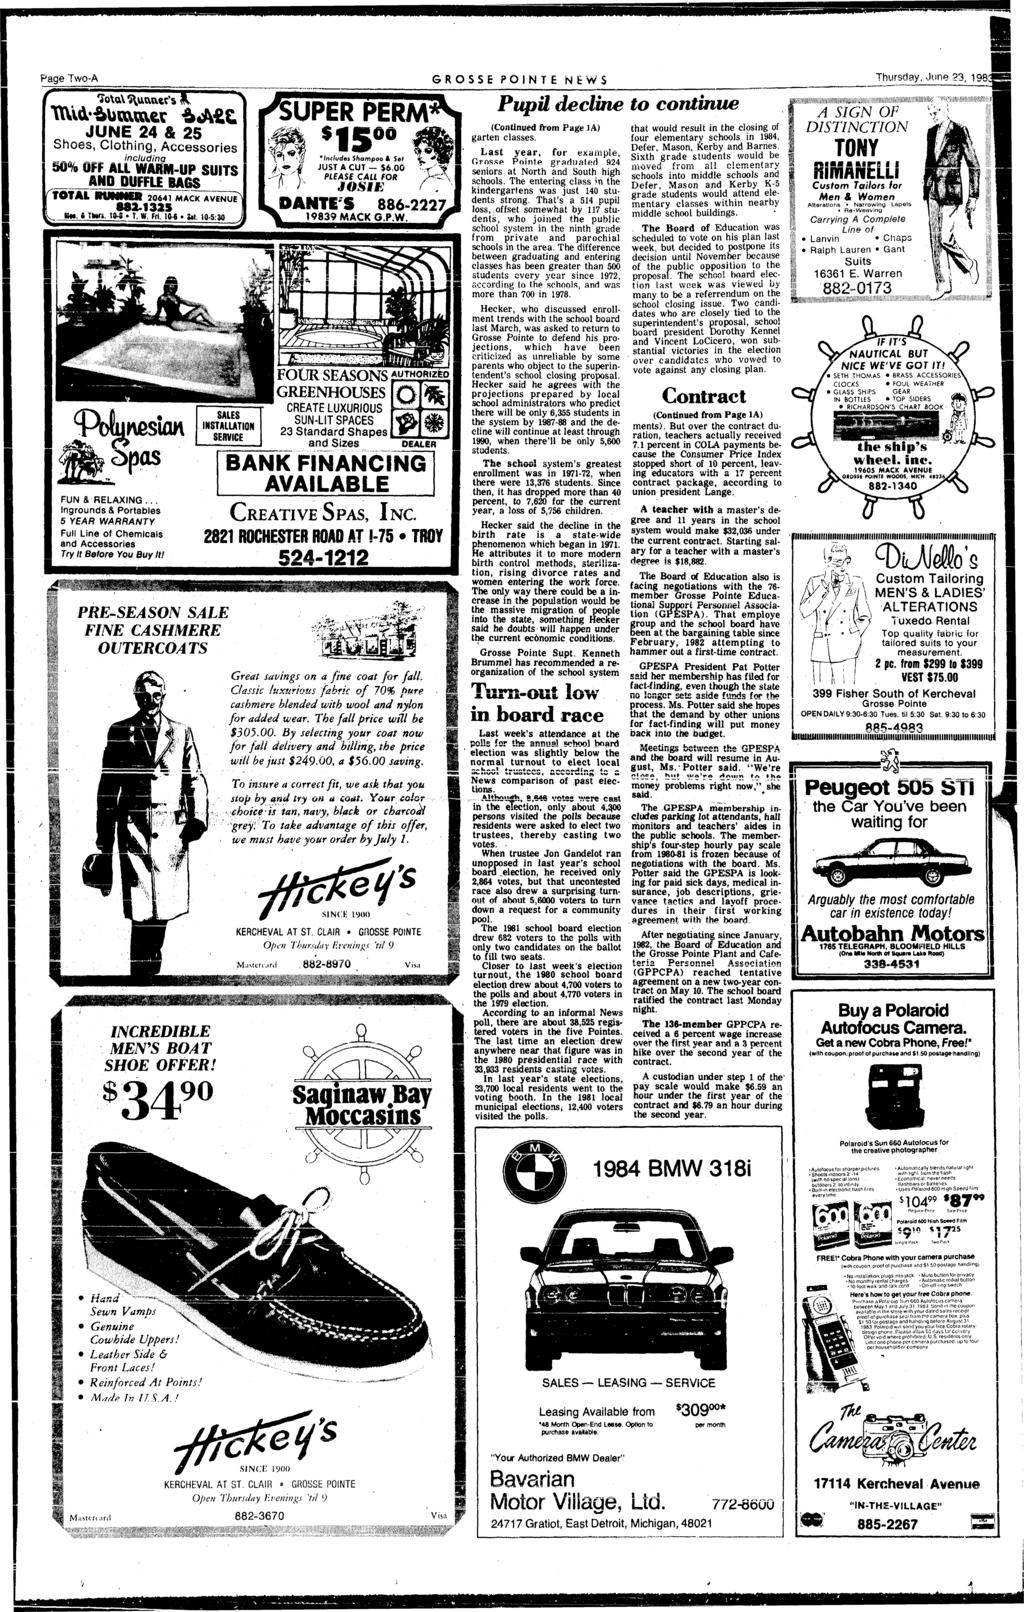 Page Two-A GROSSE PONTE NEWS Thursday, June 23, 1981 JUNE 24 & 25 Shoes, Clothng, Accessores ncludna 50% OFF ALL WARM-UP SOTS AND DUFFLE BAGS TOTAL RUNNER 20641 MACK AVENUE" 882-1325 ^ MgJtL* 1 "-